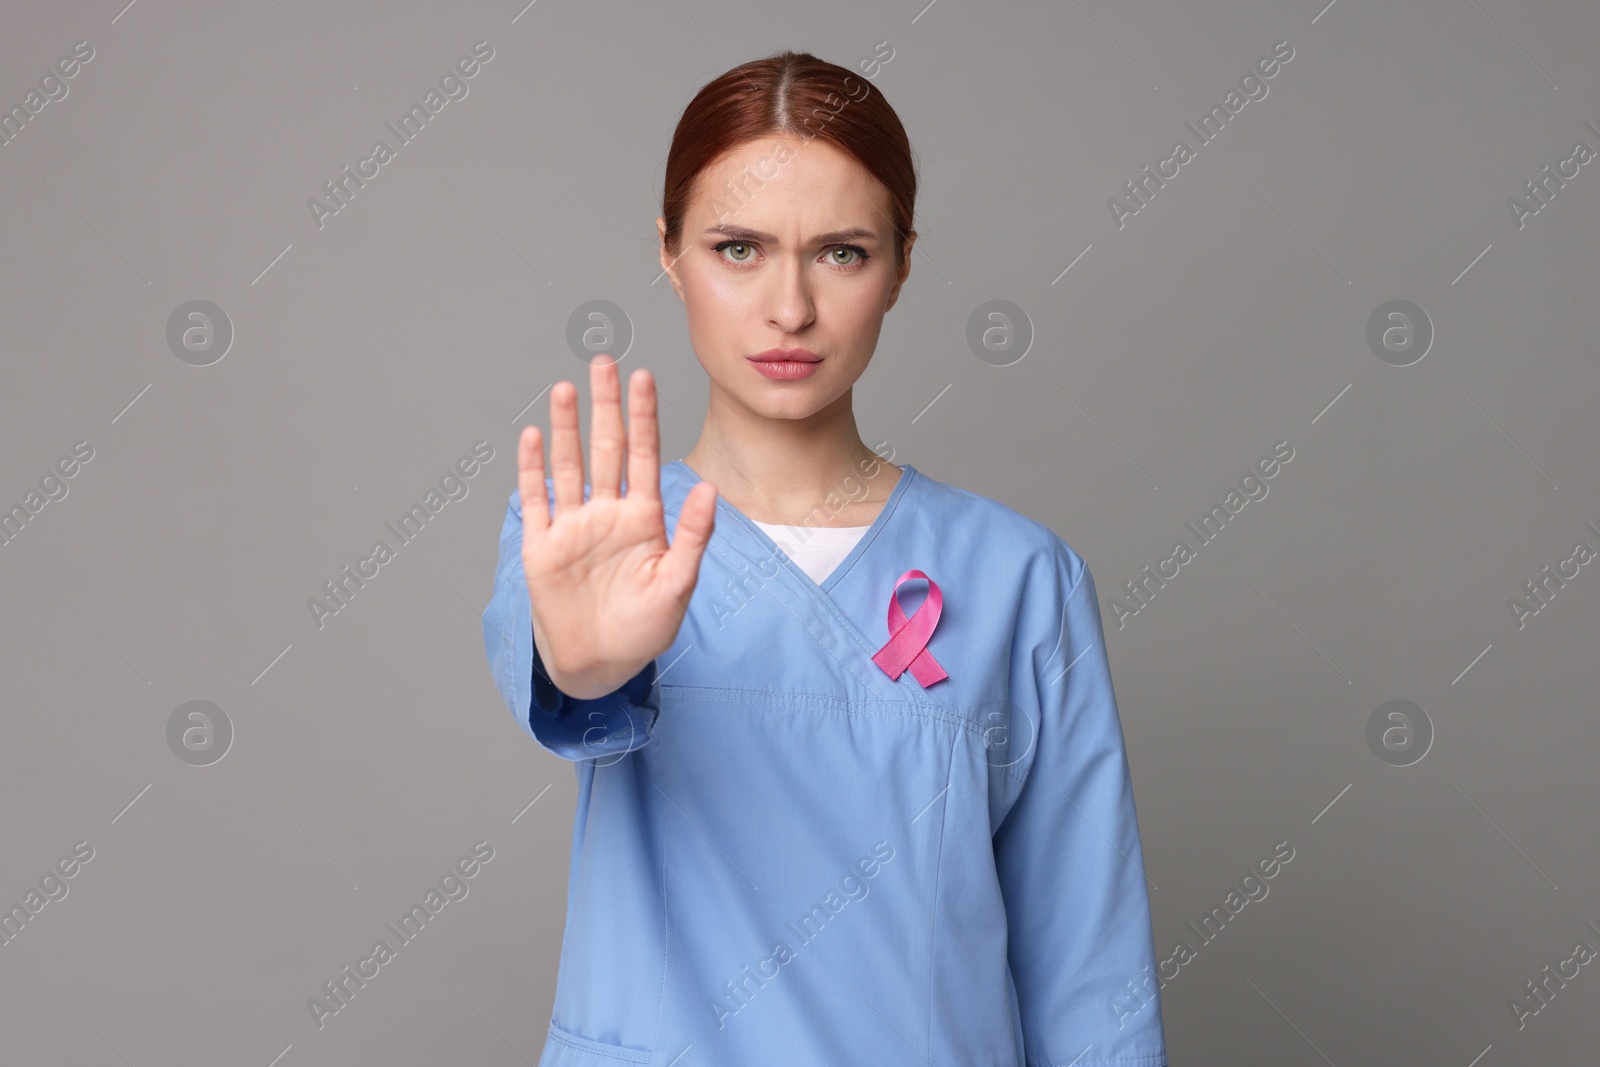 Photo of Mammologist with pink ribbon showing stop gesture on gray background. Breast cancer awareness